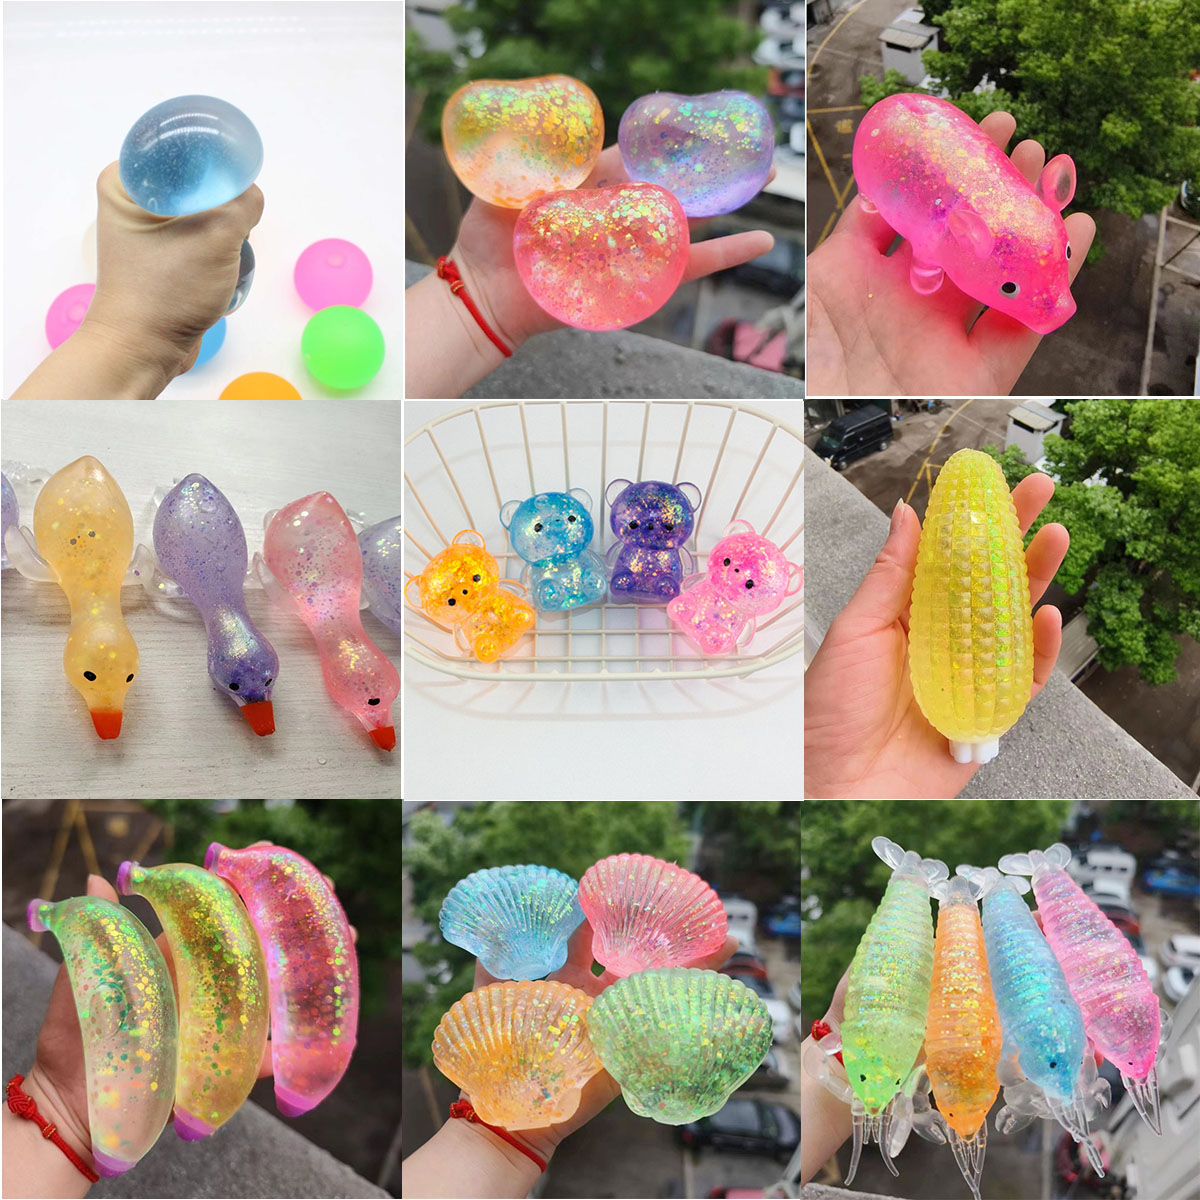 Slow Rebound Maltose Syrup Decompression Ball jelly cat toys - Pinch Decontress jelly cat toys